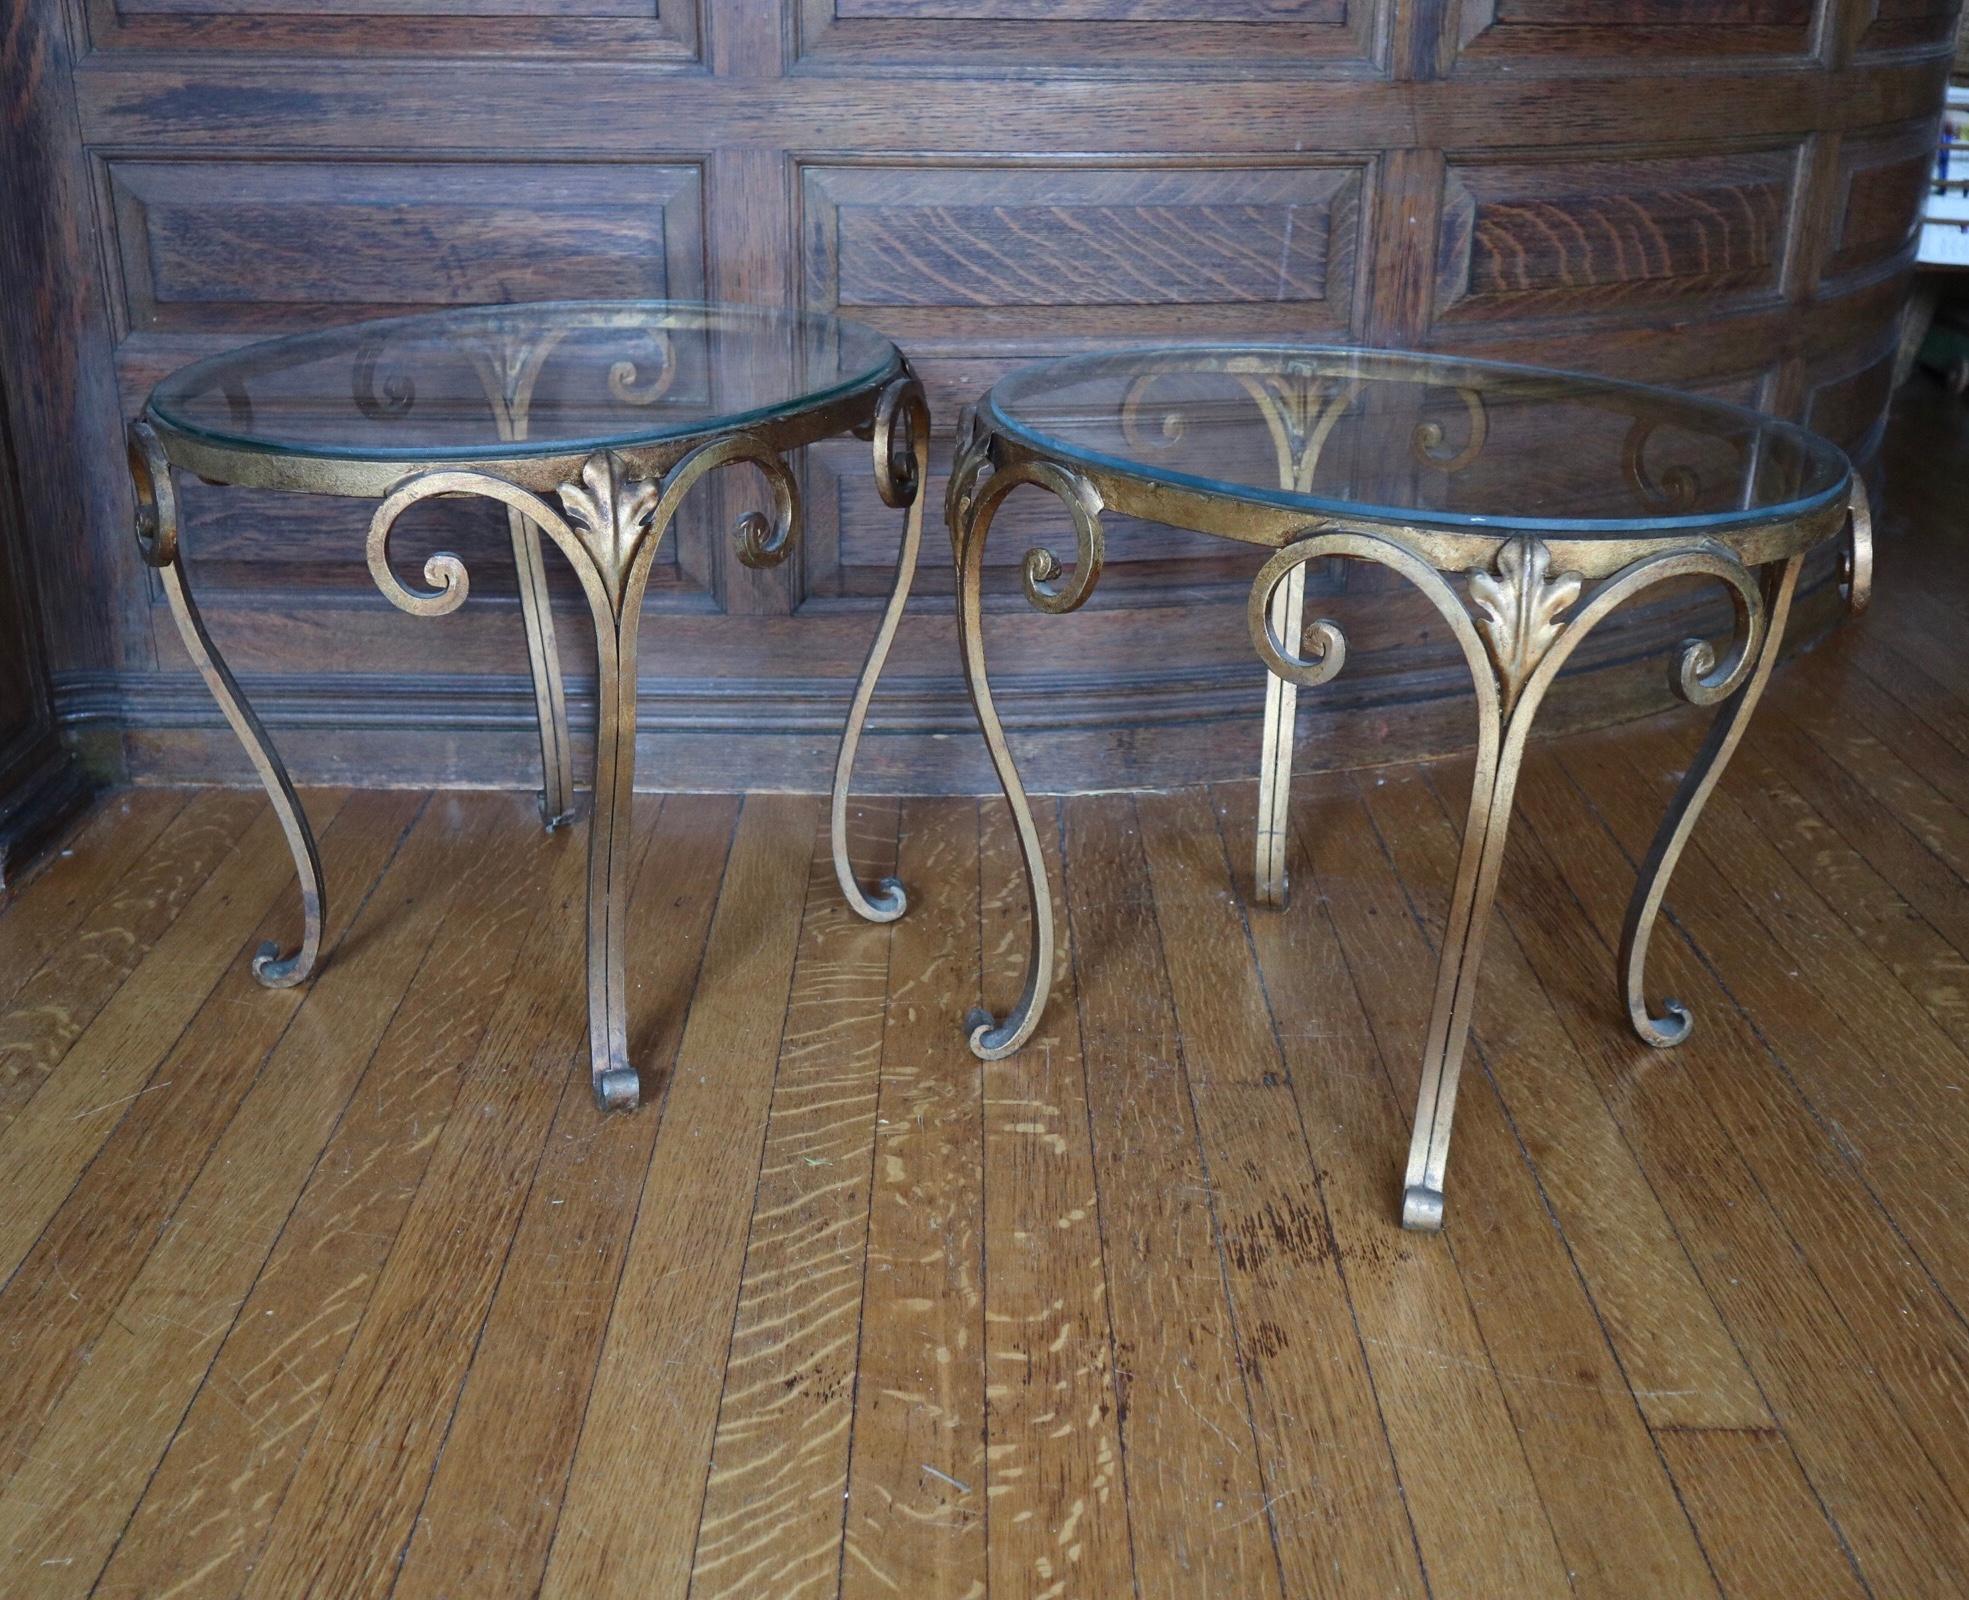 Elegant gold/gilt/gilded and glass side tables or bedside tables. In good condition. No chips to glass. Can support normal lamps or pottery.